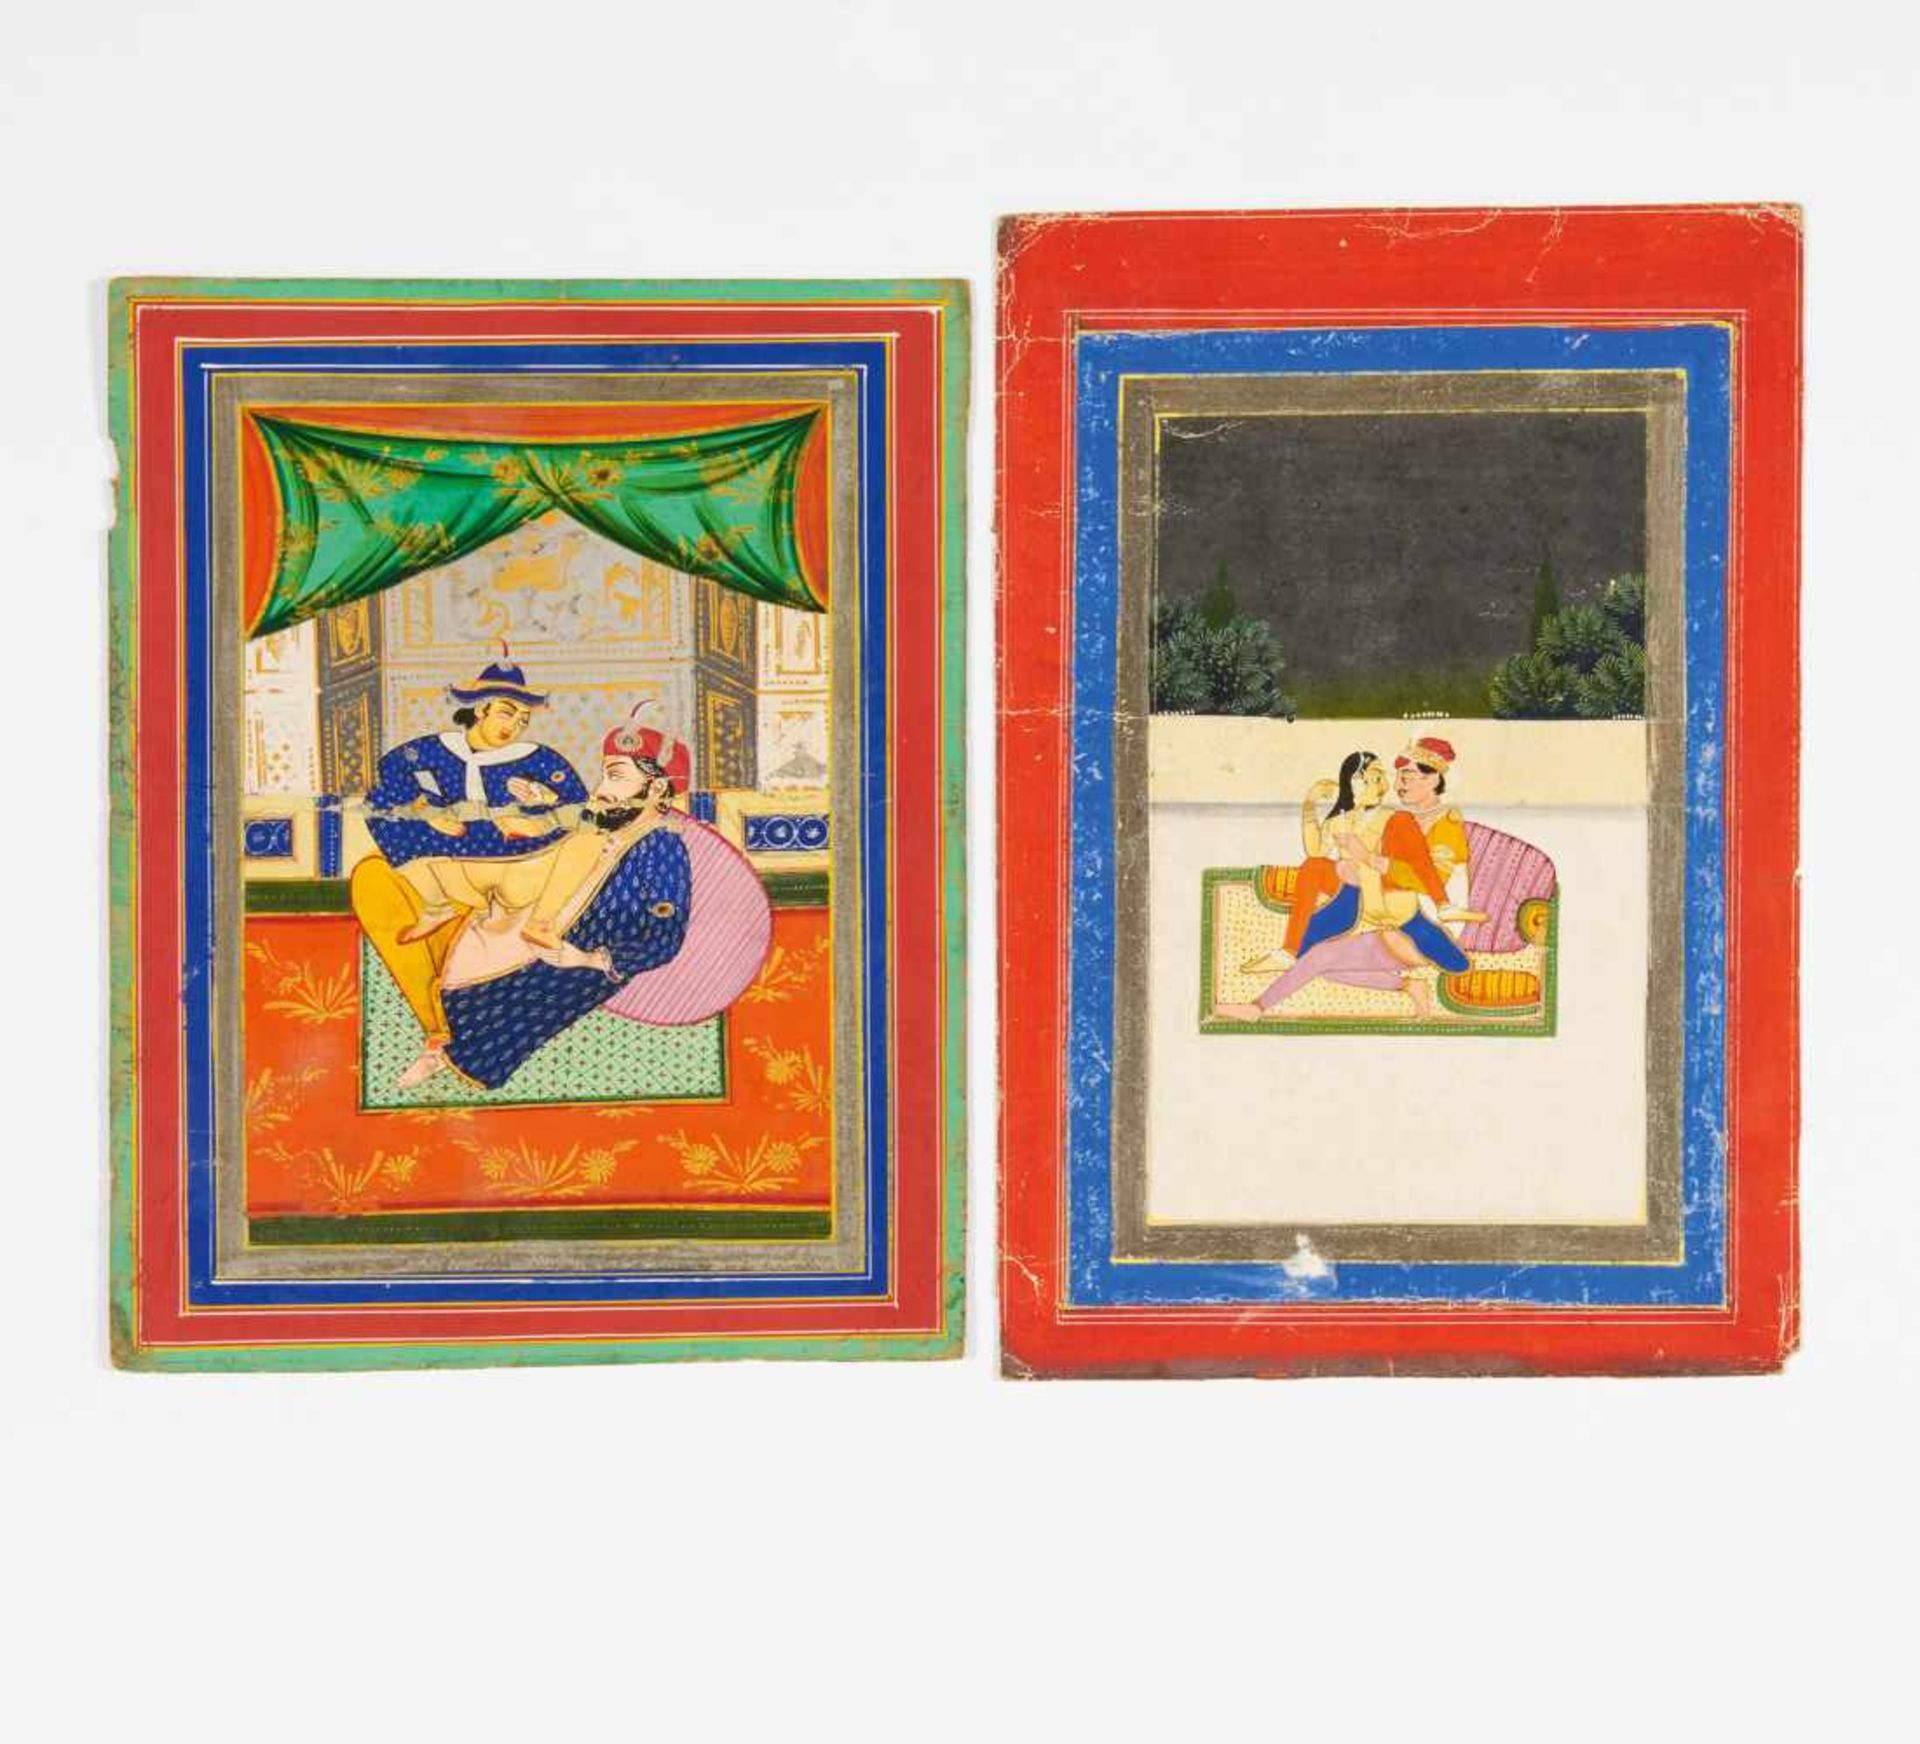 EIGHT EROTIC PAINTINGS. East India. Rajasthan, prob. Jaipur. Late 19th/beg. 20th c. Pigments and